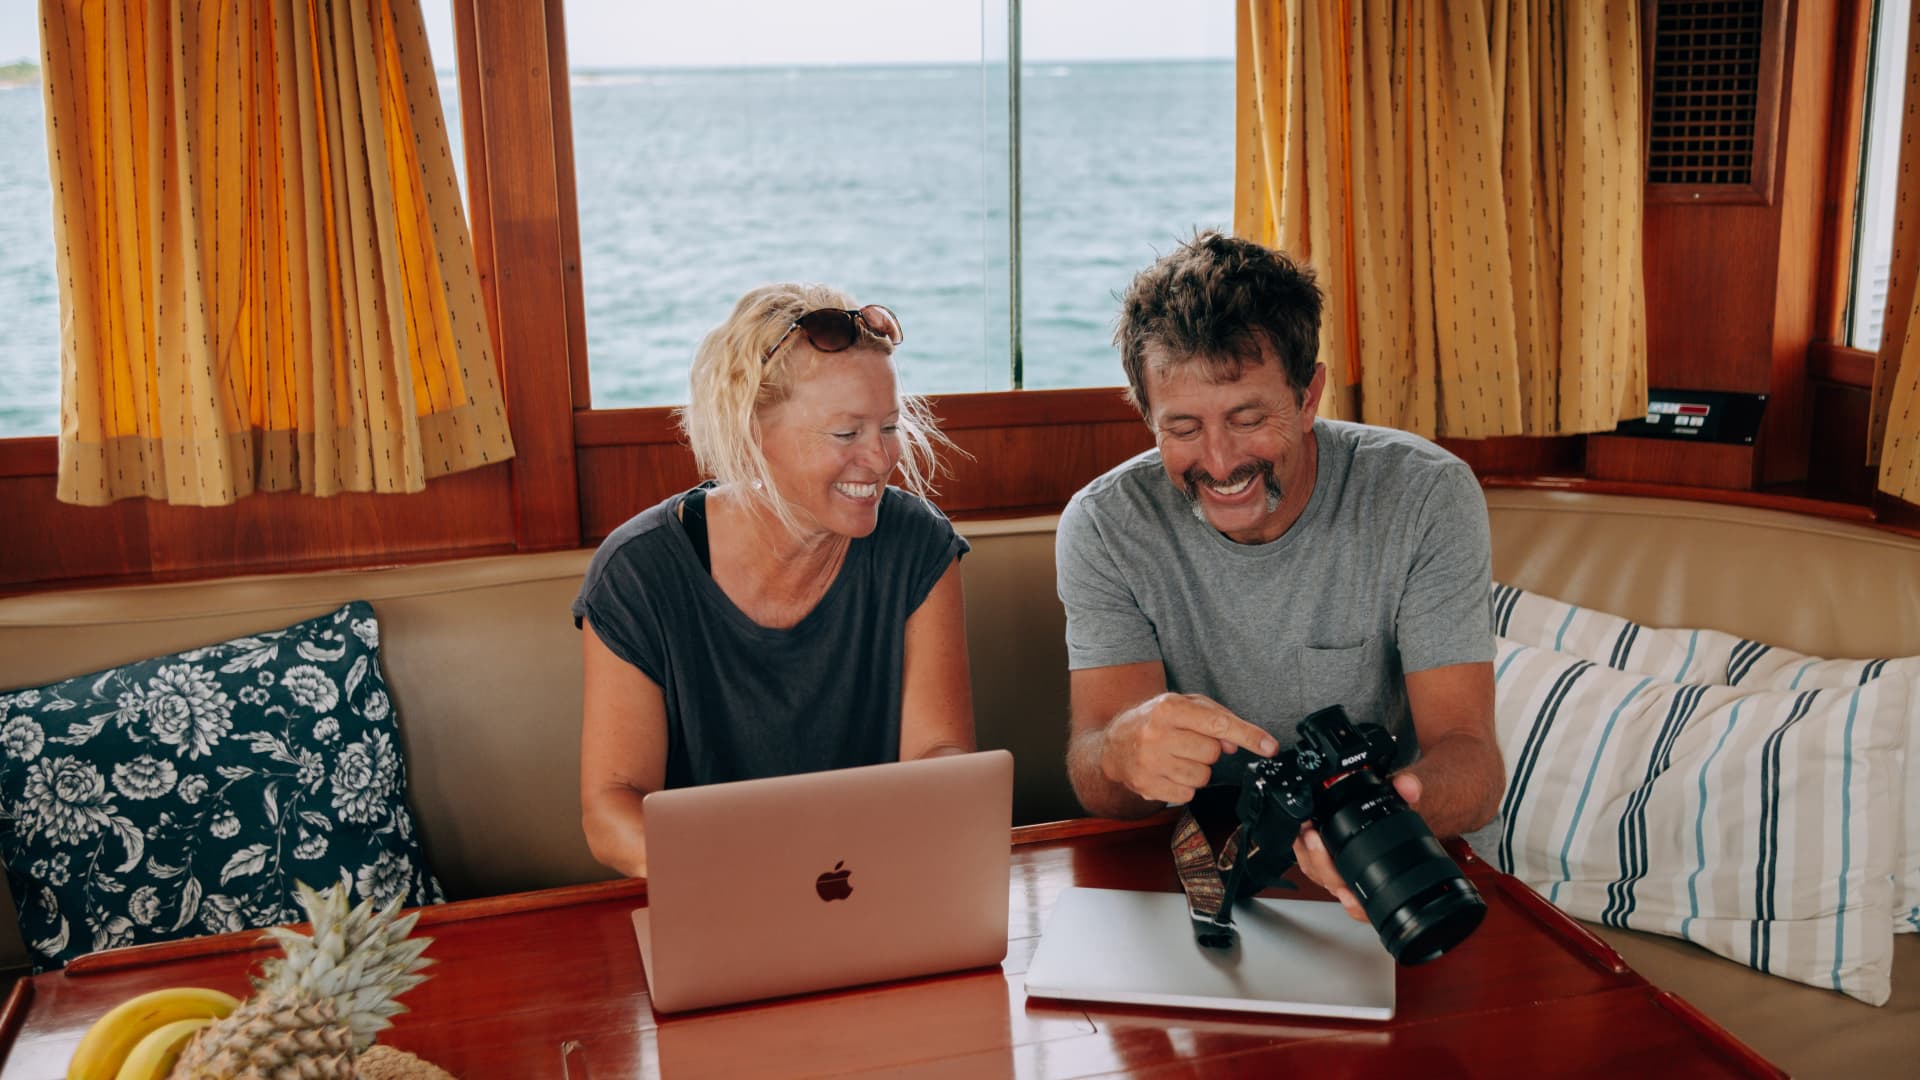 The couple kept track of every dollar they spent to sail around the world, which averaged $3,100 a month, said Schulte. 